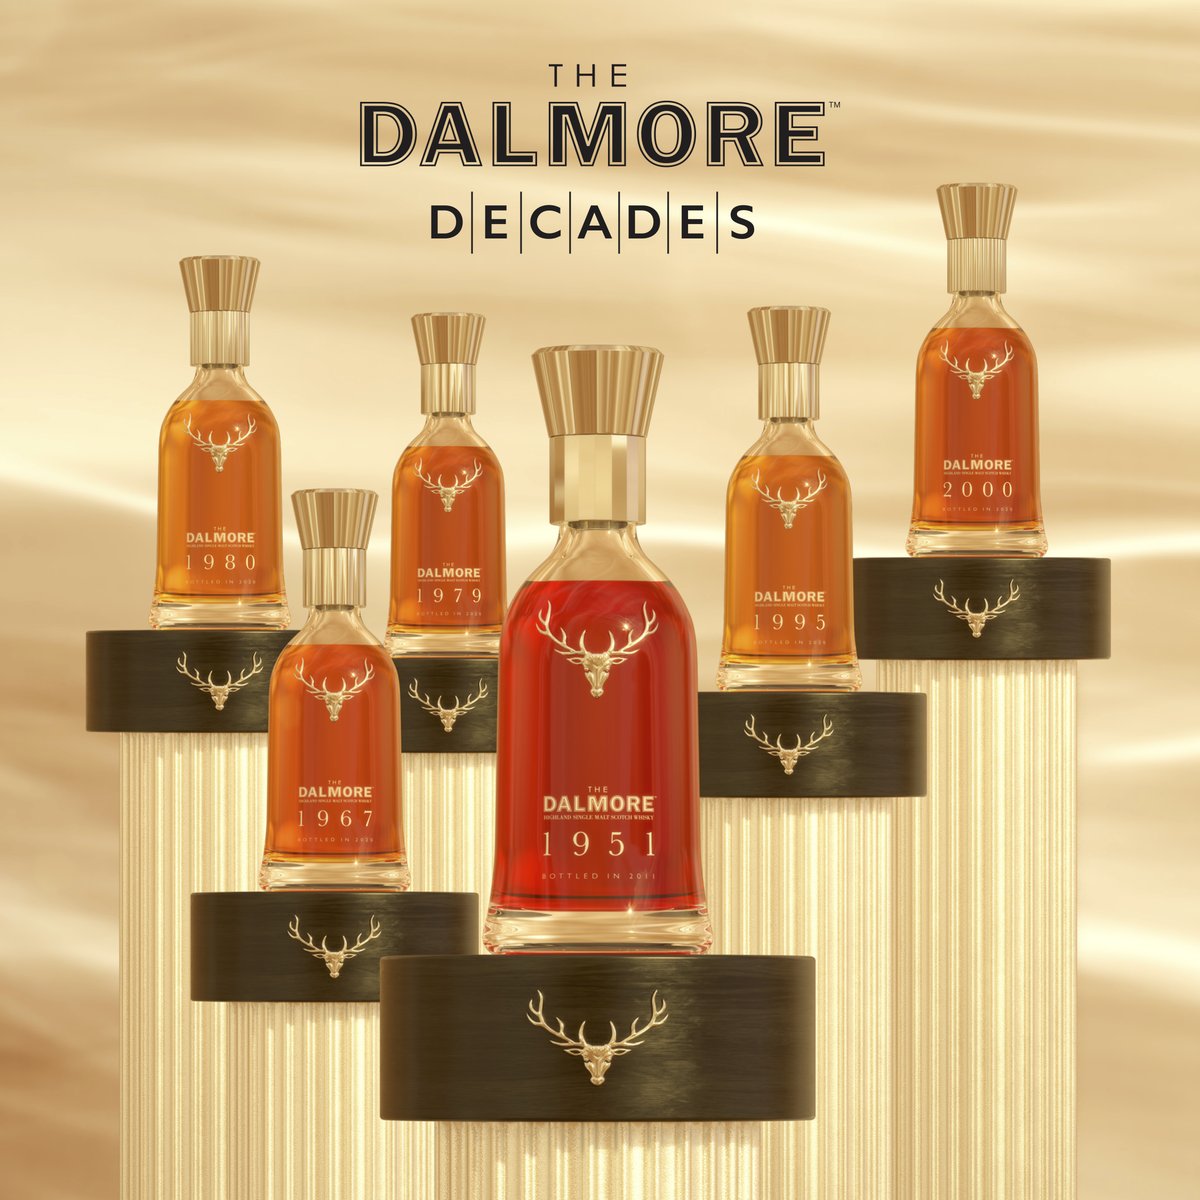 The Dalmore Decades No.6 Collection is a truly unique, one-of-one set of six Decades single malts. Each decanter encapsulates a story of The Dalmore’s relentless pursuit of excellence. #dalmore #dalmorewhisky #dalmoredecades #thedalmore